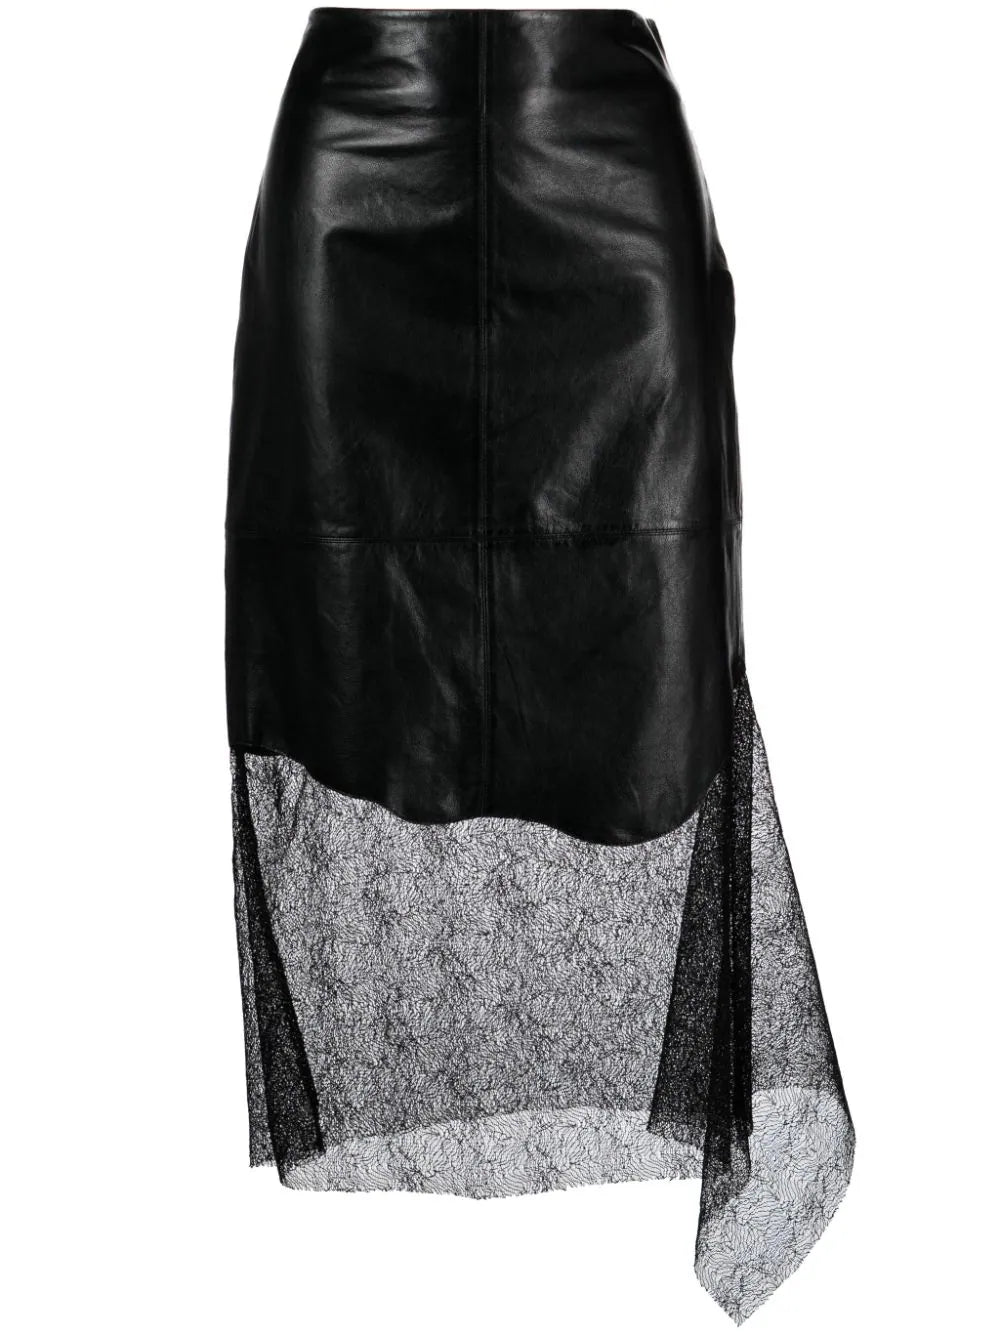 lace-trimmed leather skirt